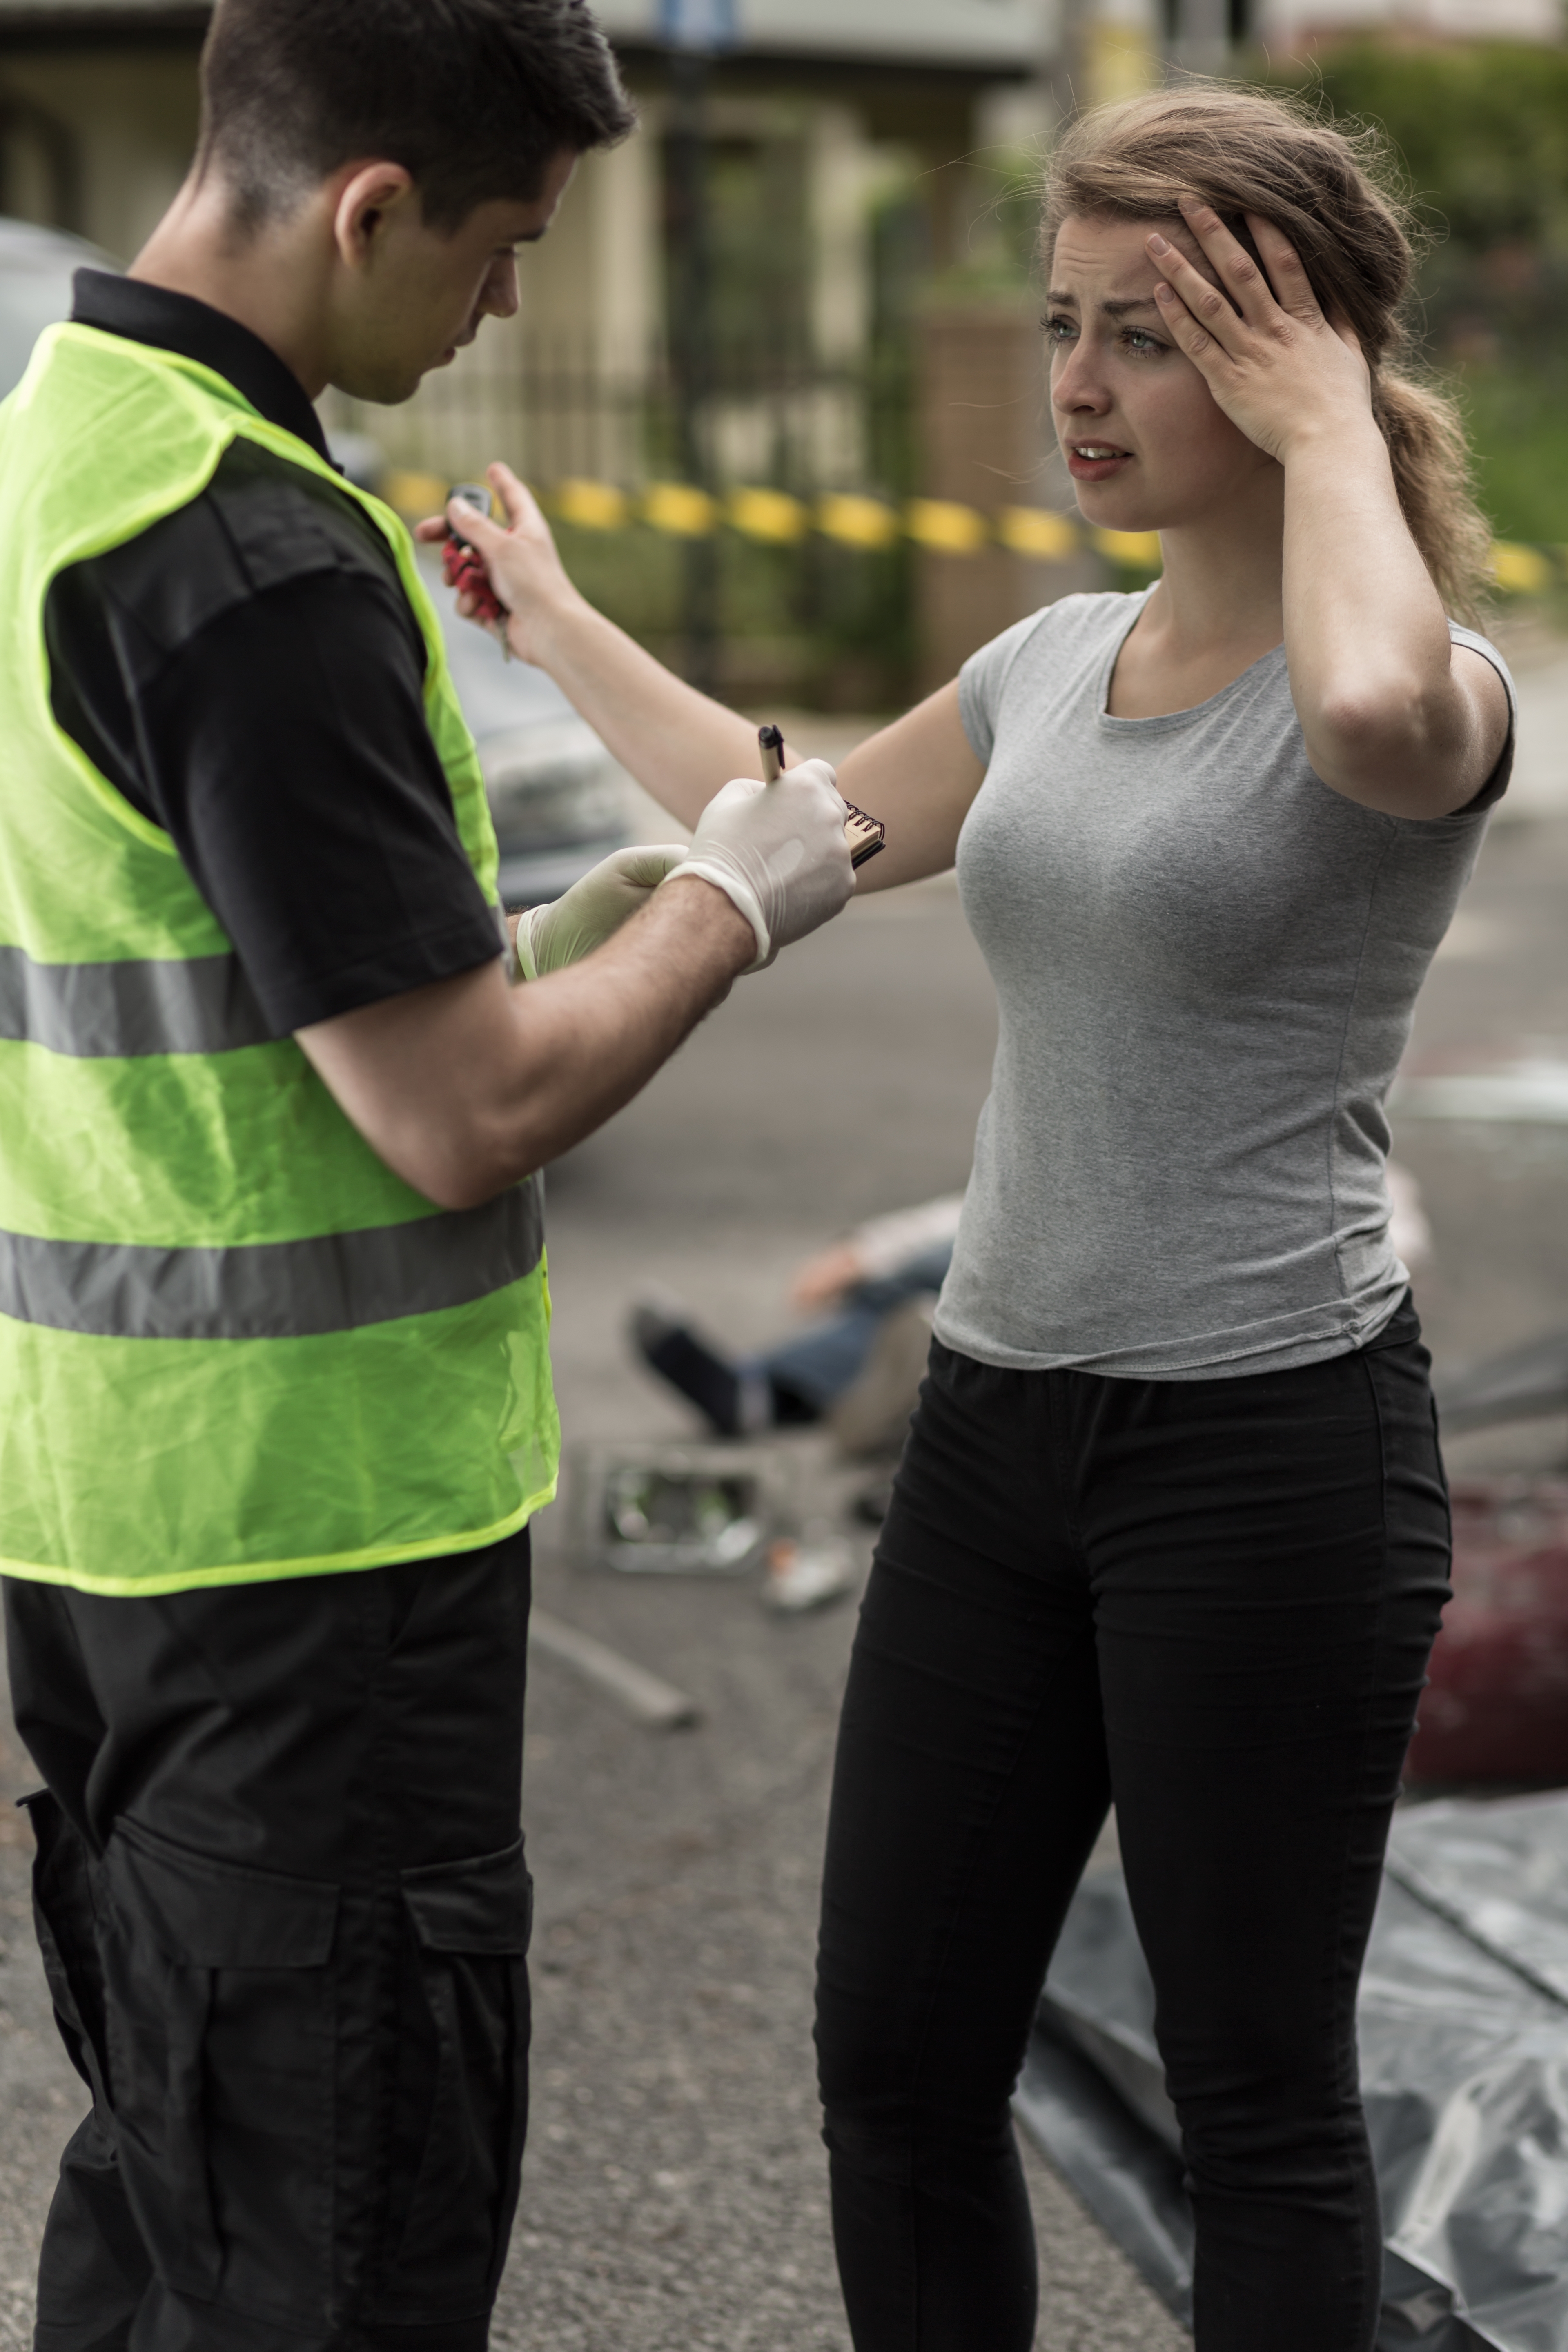 A woman giving a statement to a police officer. | Source: Shutterstock